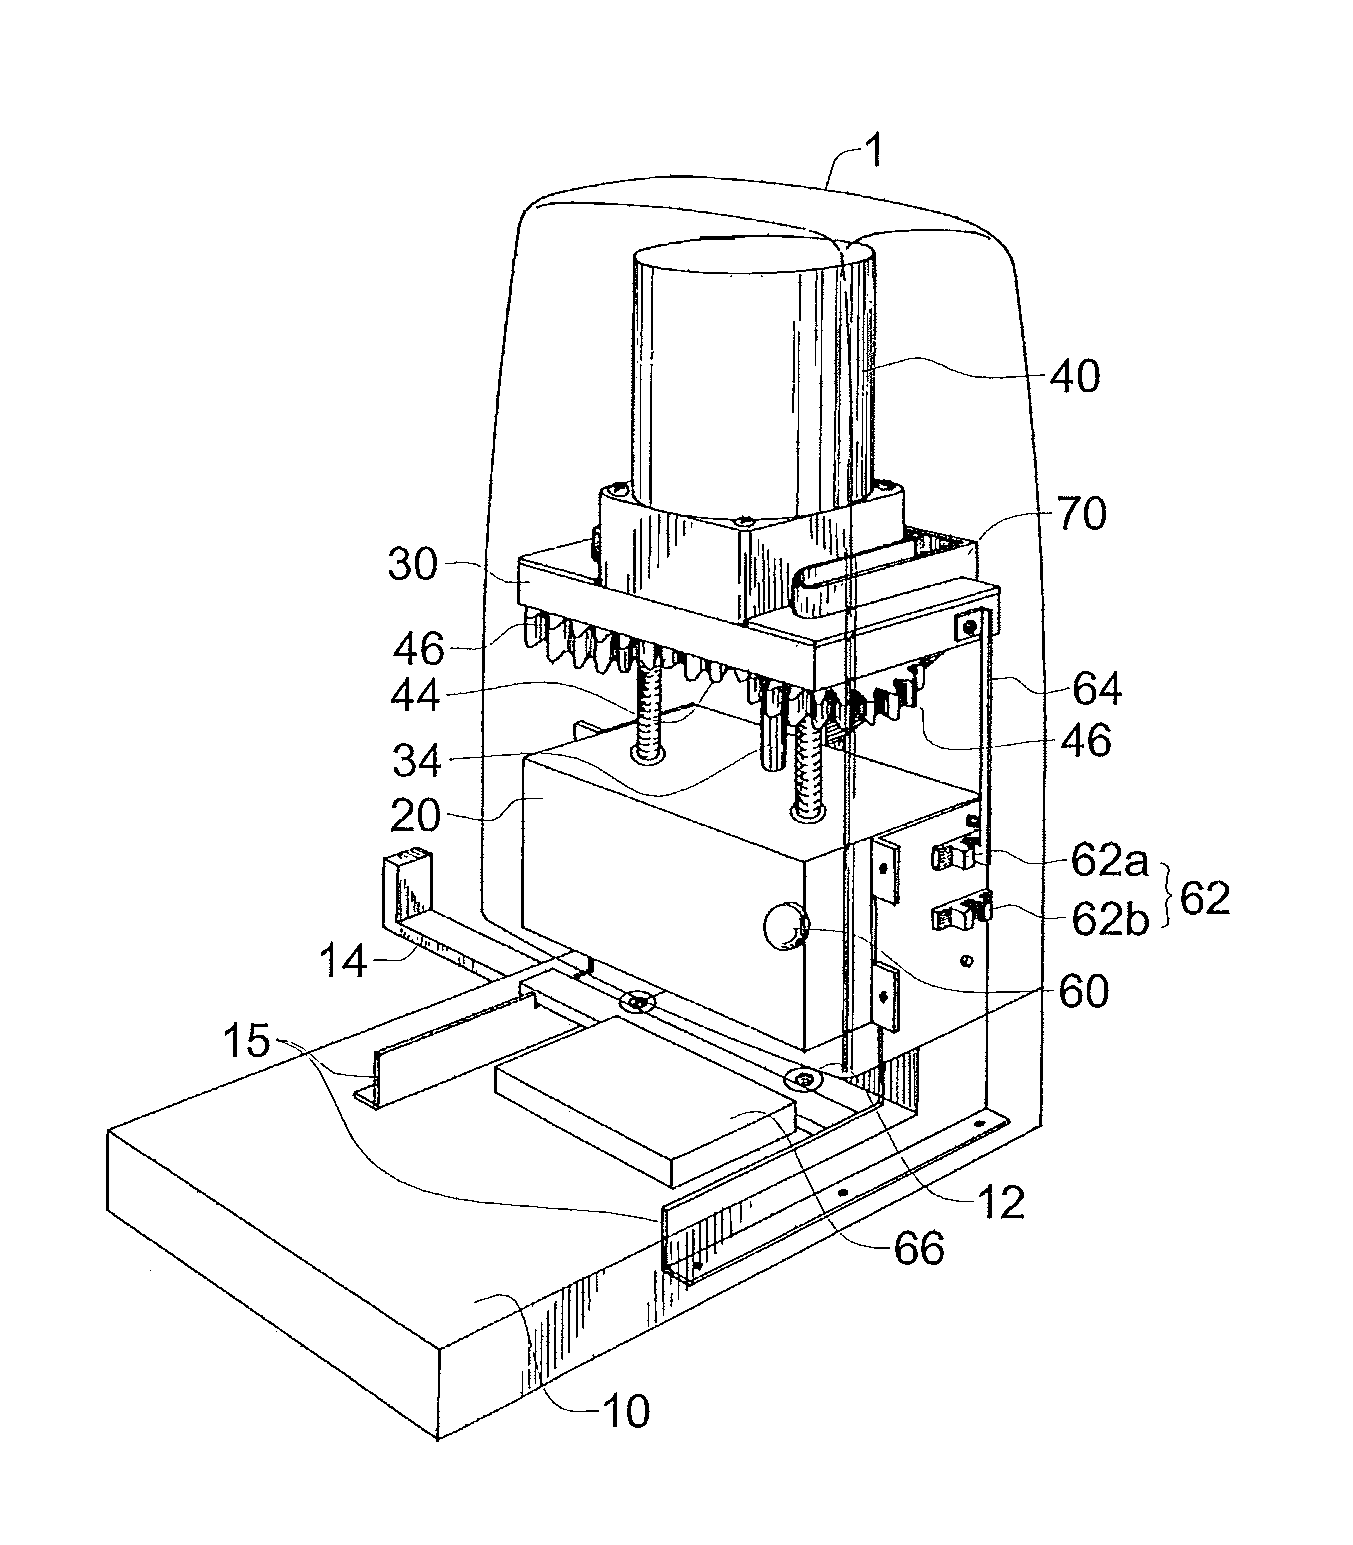 Automatic electric punching apparatus